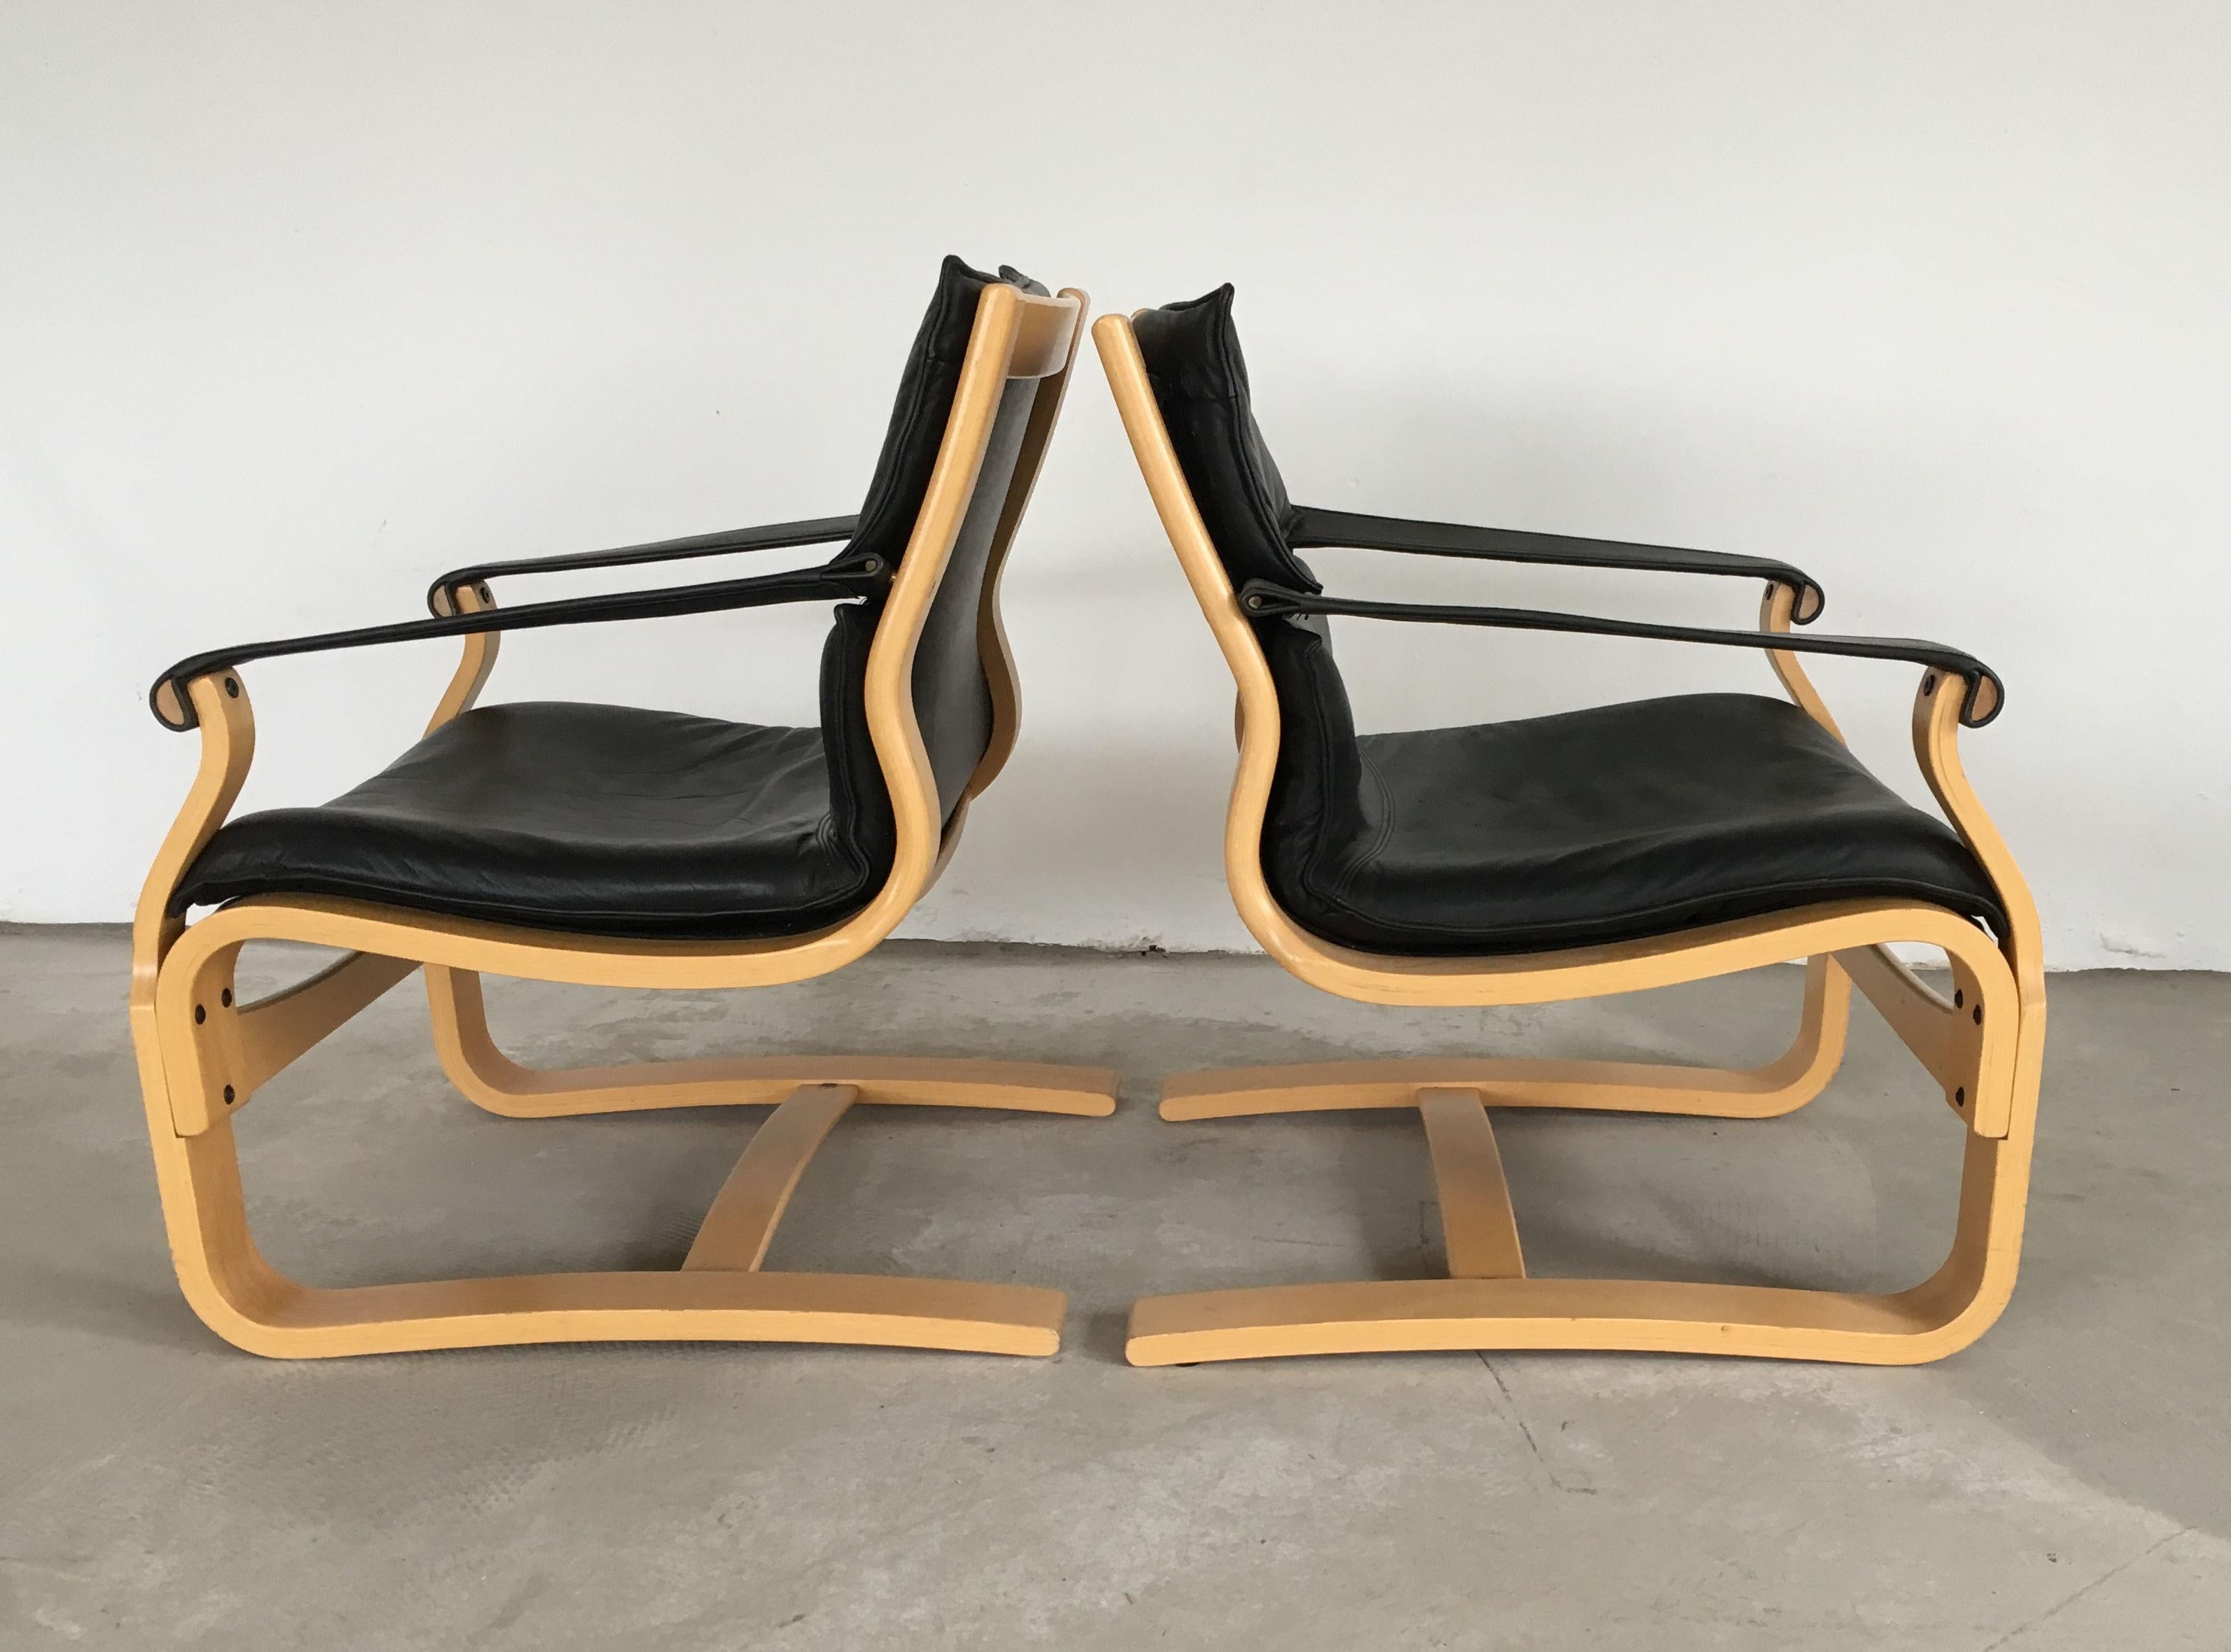 Scandinavian Modern 1970s Pair of Ake Fribytter Lounge Chairs in Beech and Black Leather by Nelo